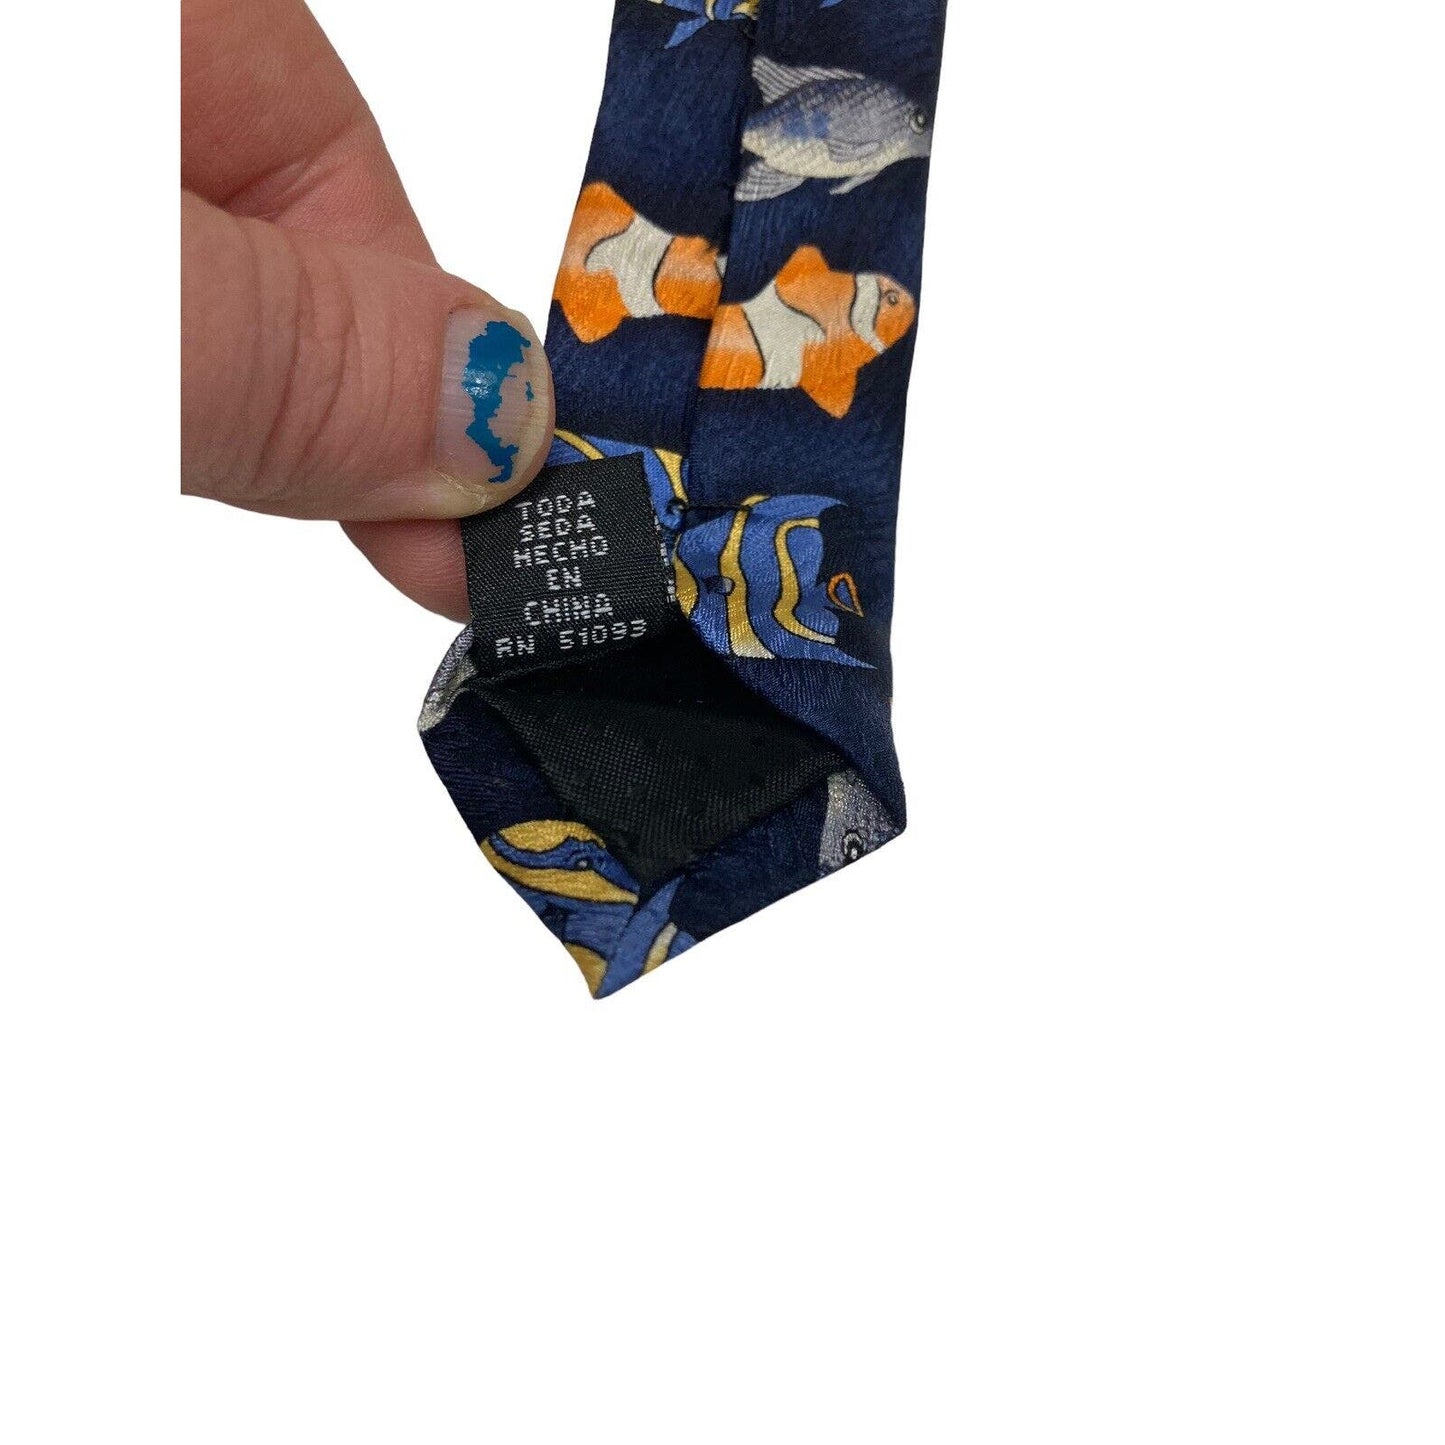 Nature By Design Clown Fish Exotic Fish Tropical Blue Novelty Necktie